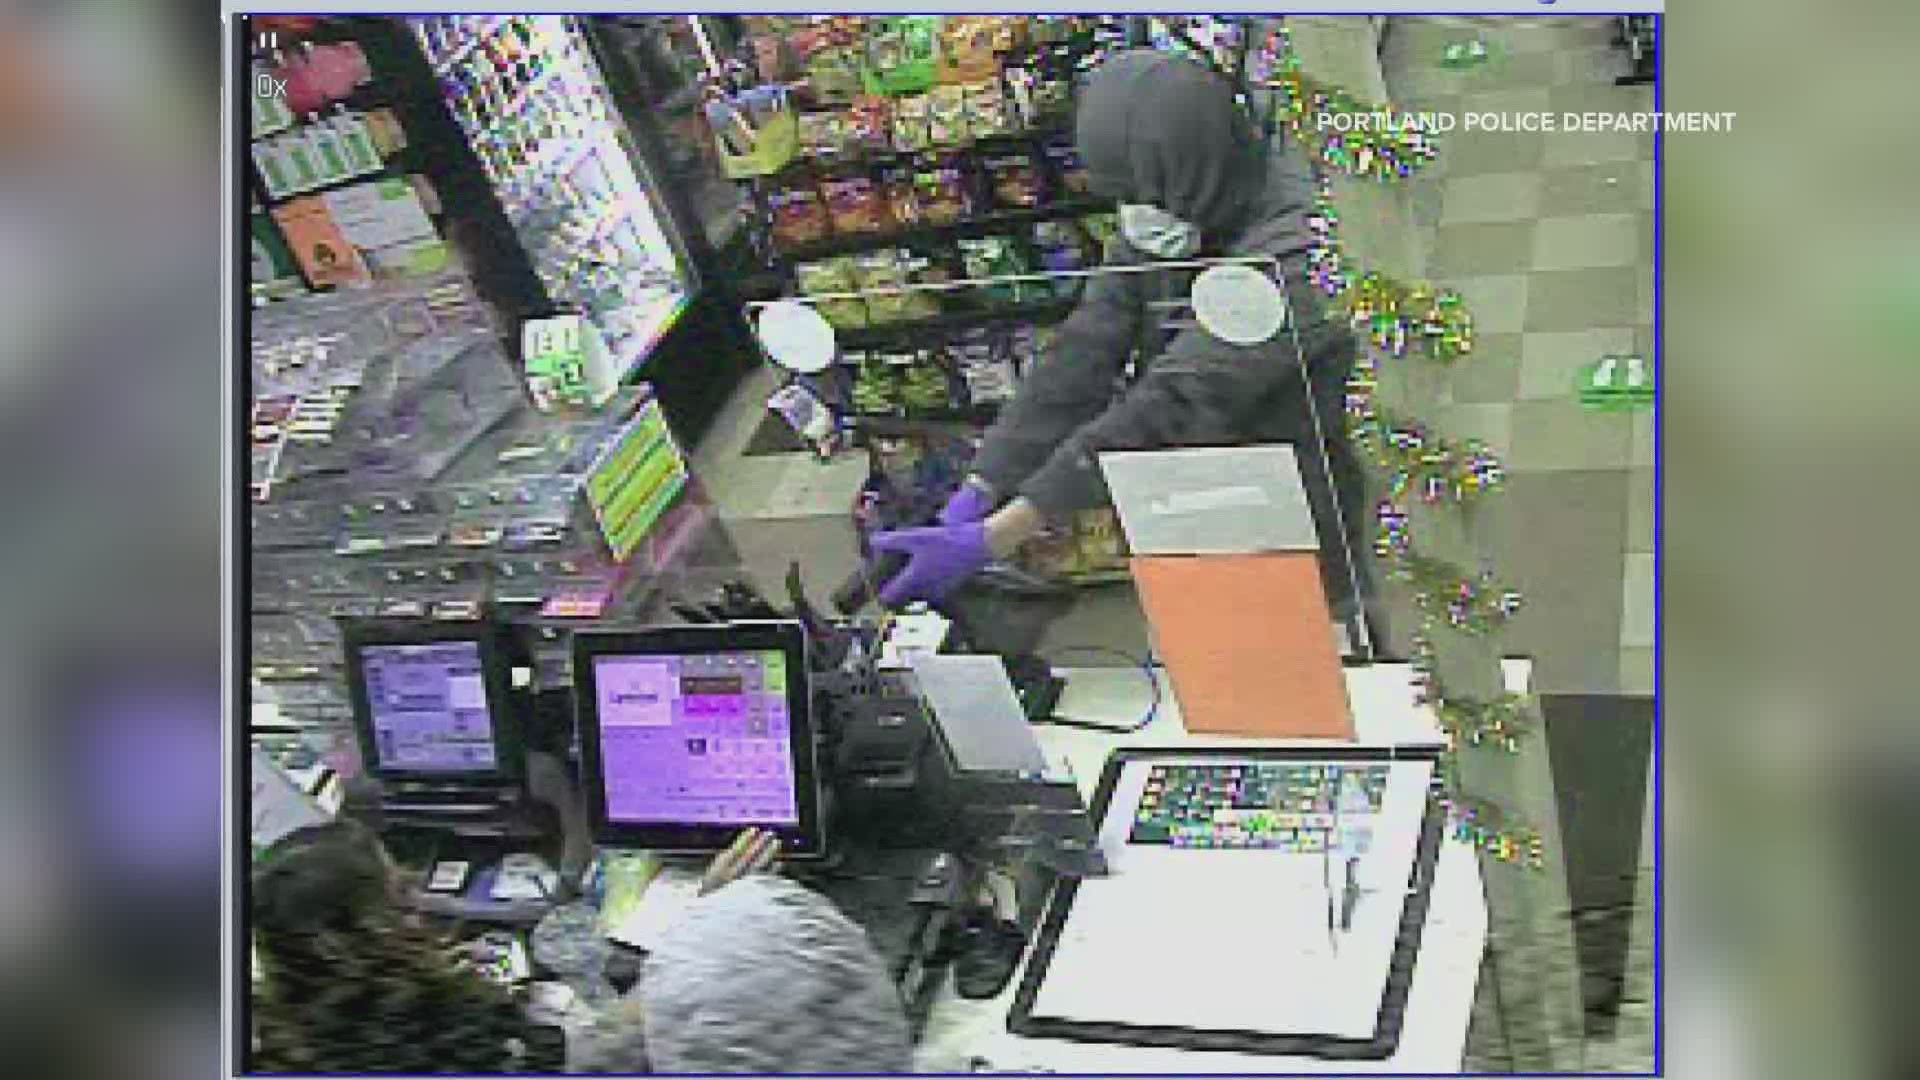 Police say two men robbed the Cumberland Farms on Pine Street in Portland. The two men were armed with semi-automatic hand guns. The female clerk was not injured.